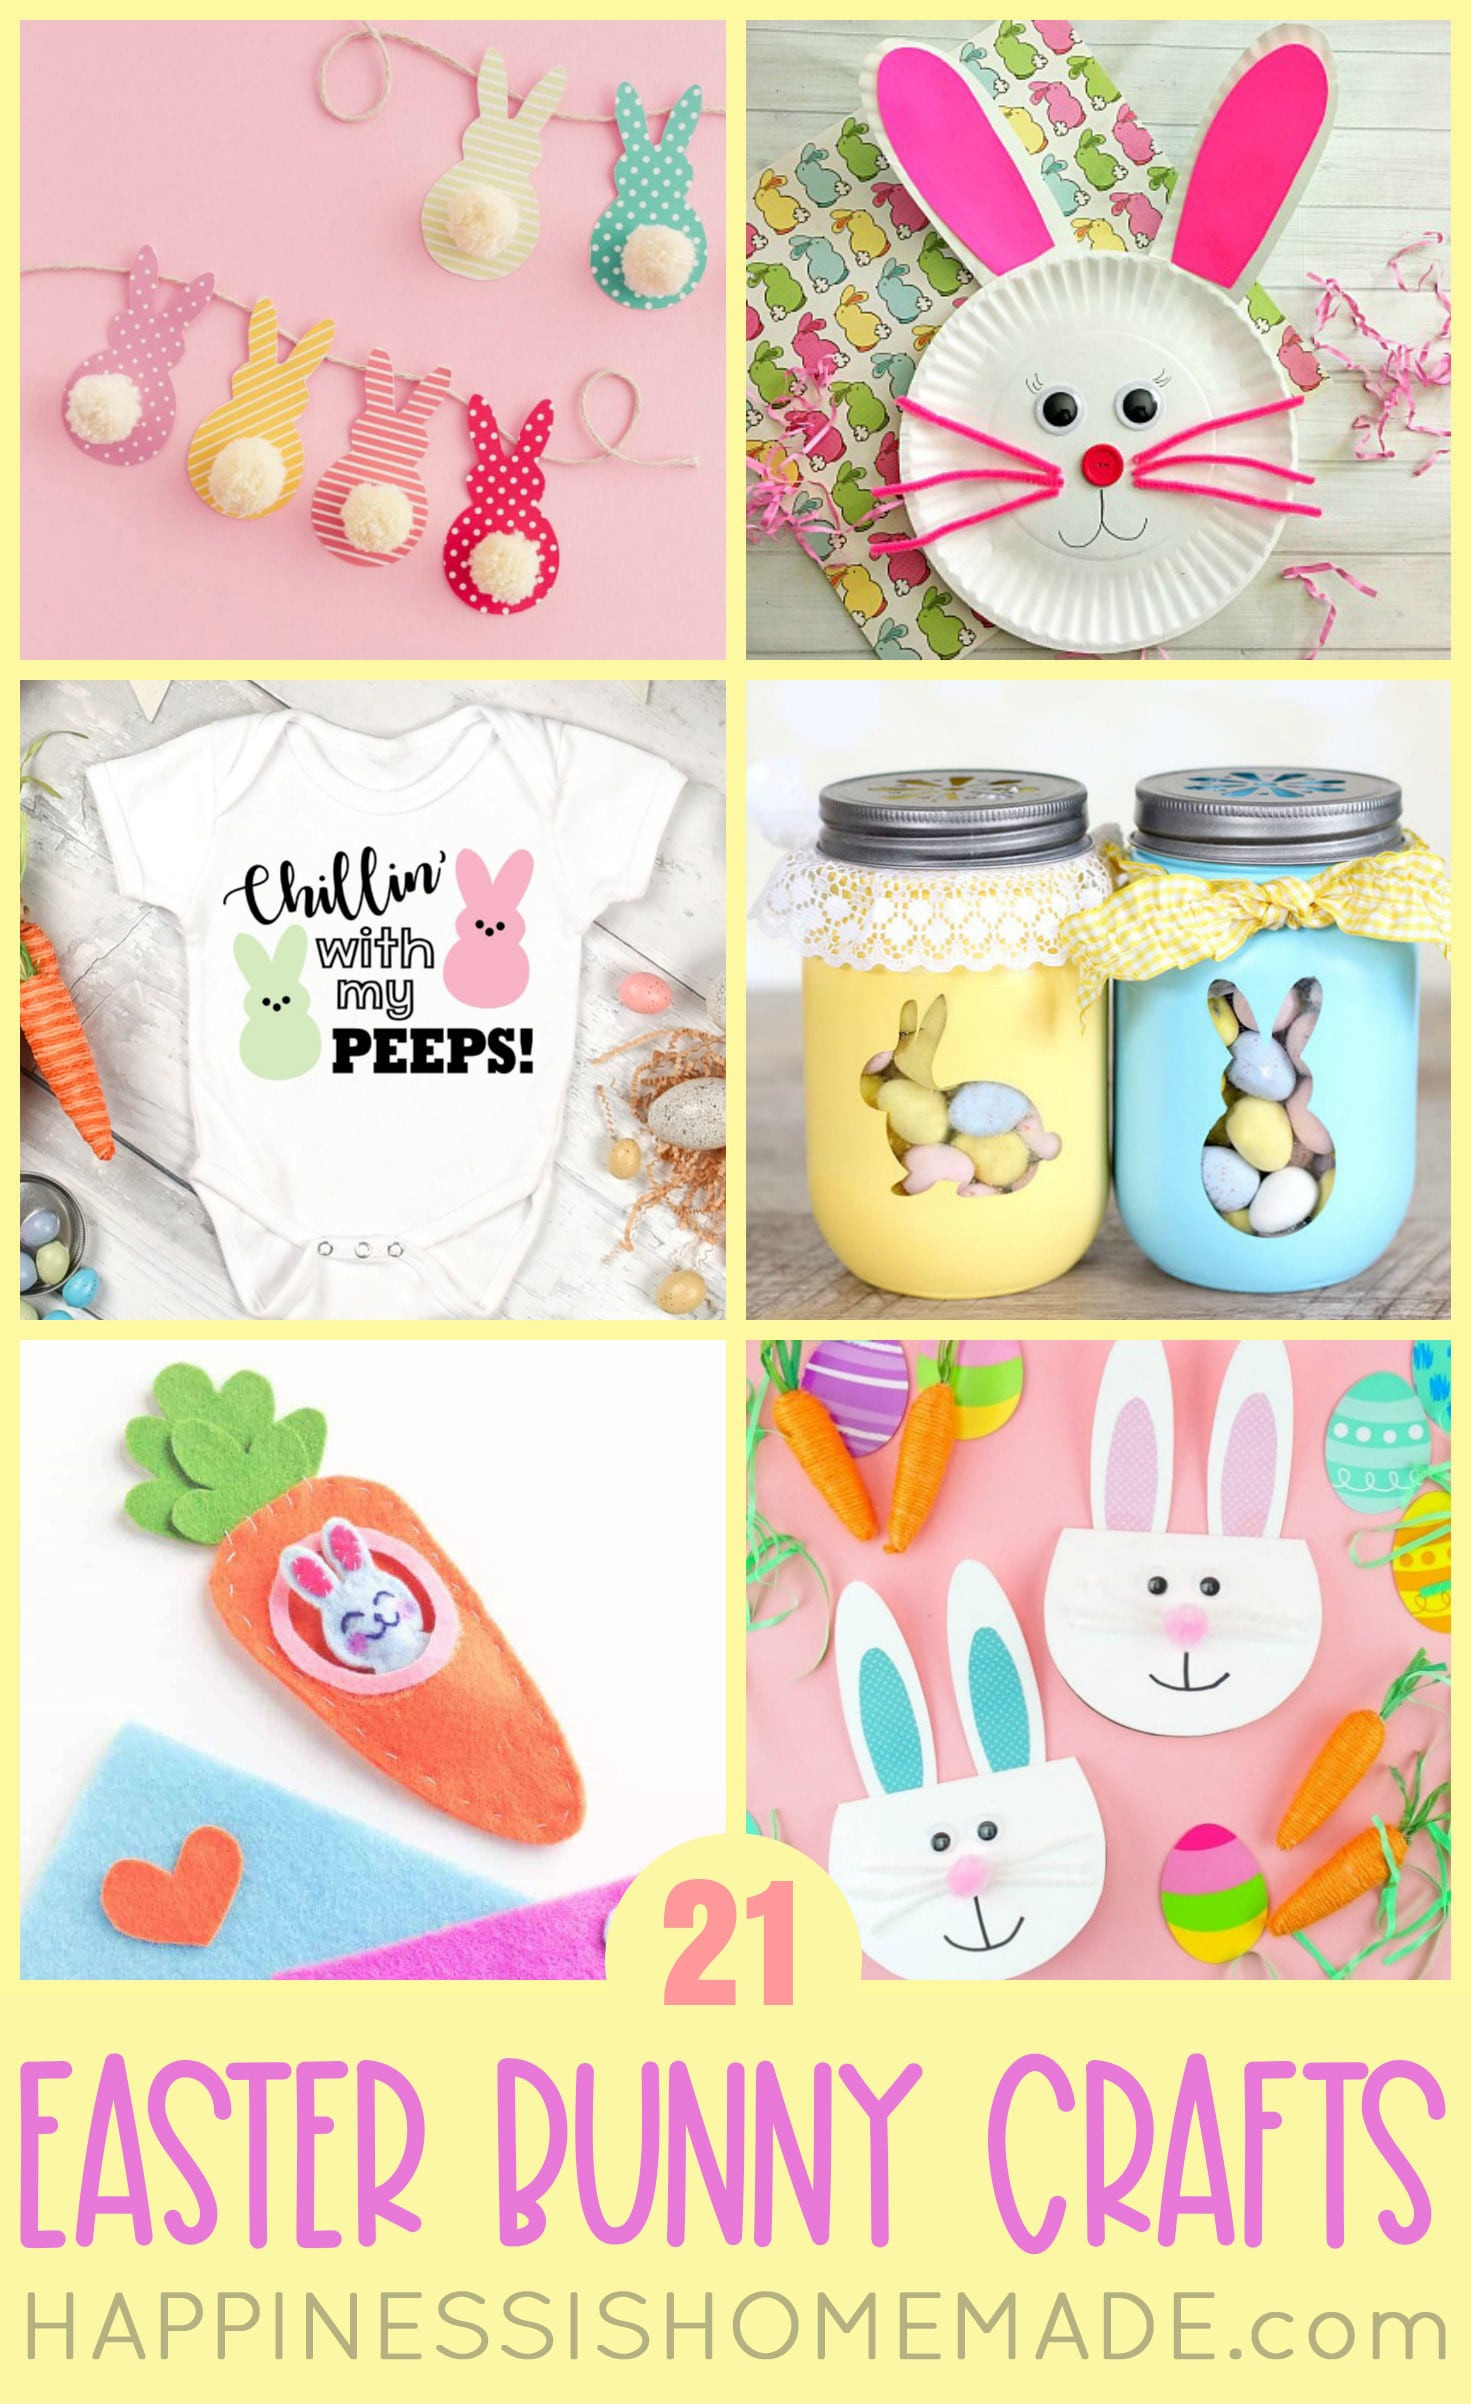 Fun Easter Crafts
 20 Easy Easter Bunny Crafts Happiness is Homemade